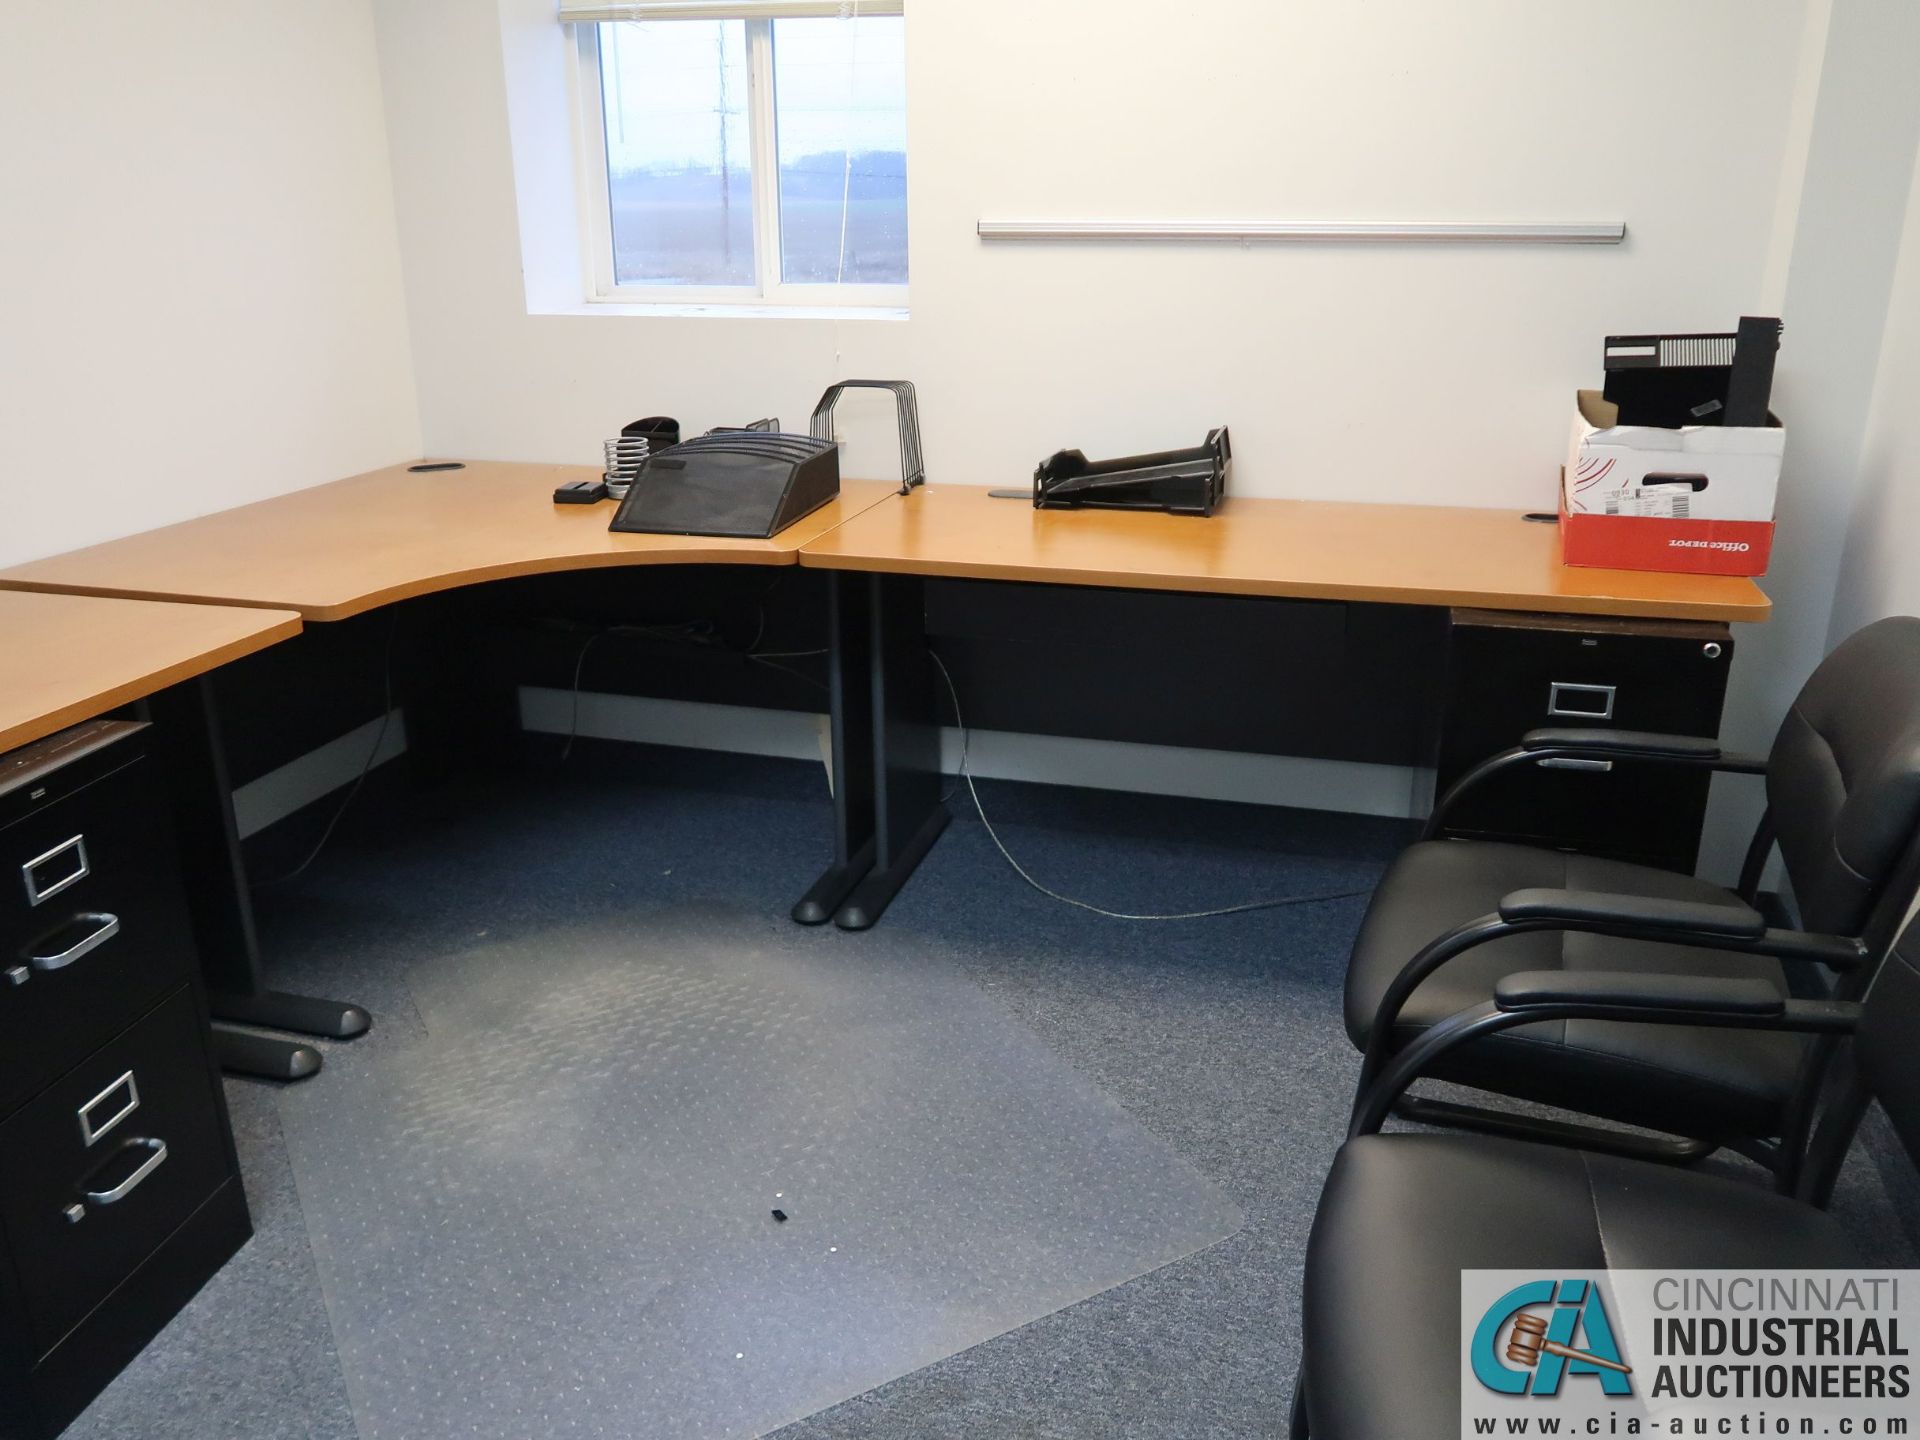 (LOT) L-SHAPED MODULAR DESK DESK WITH FILE CABINETS WITH CHAIRS ** NO DRY ERASE BOARD ** - Image 4 of 5